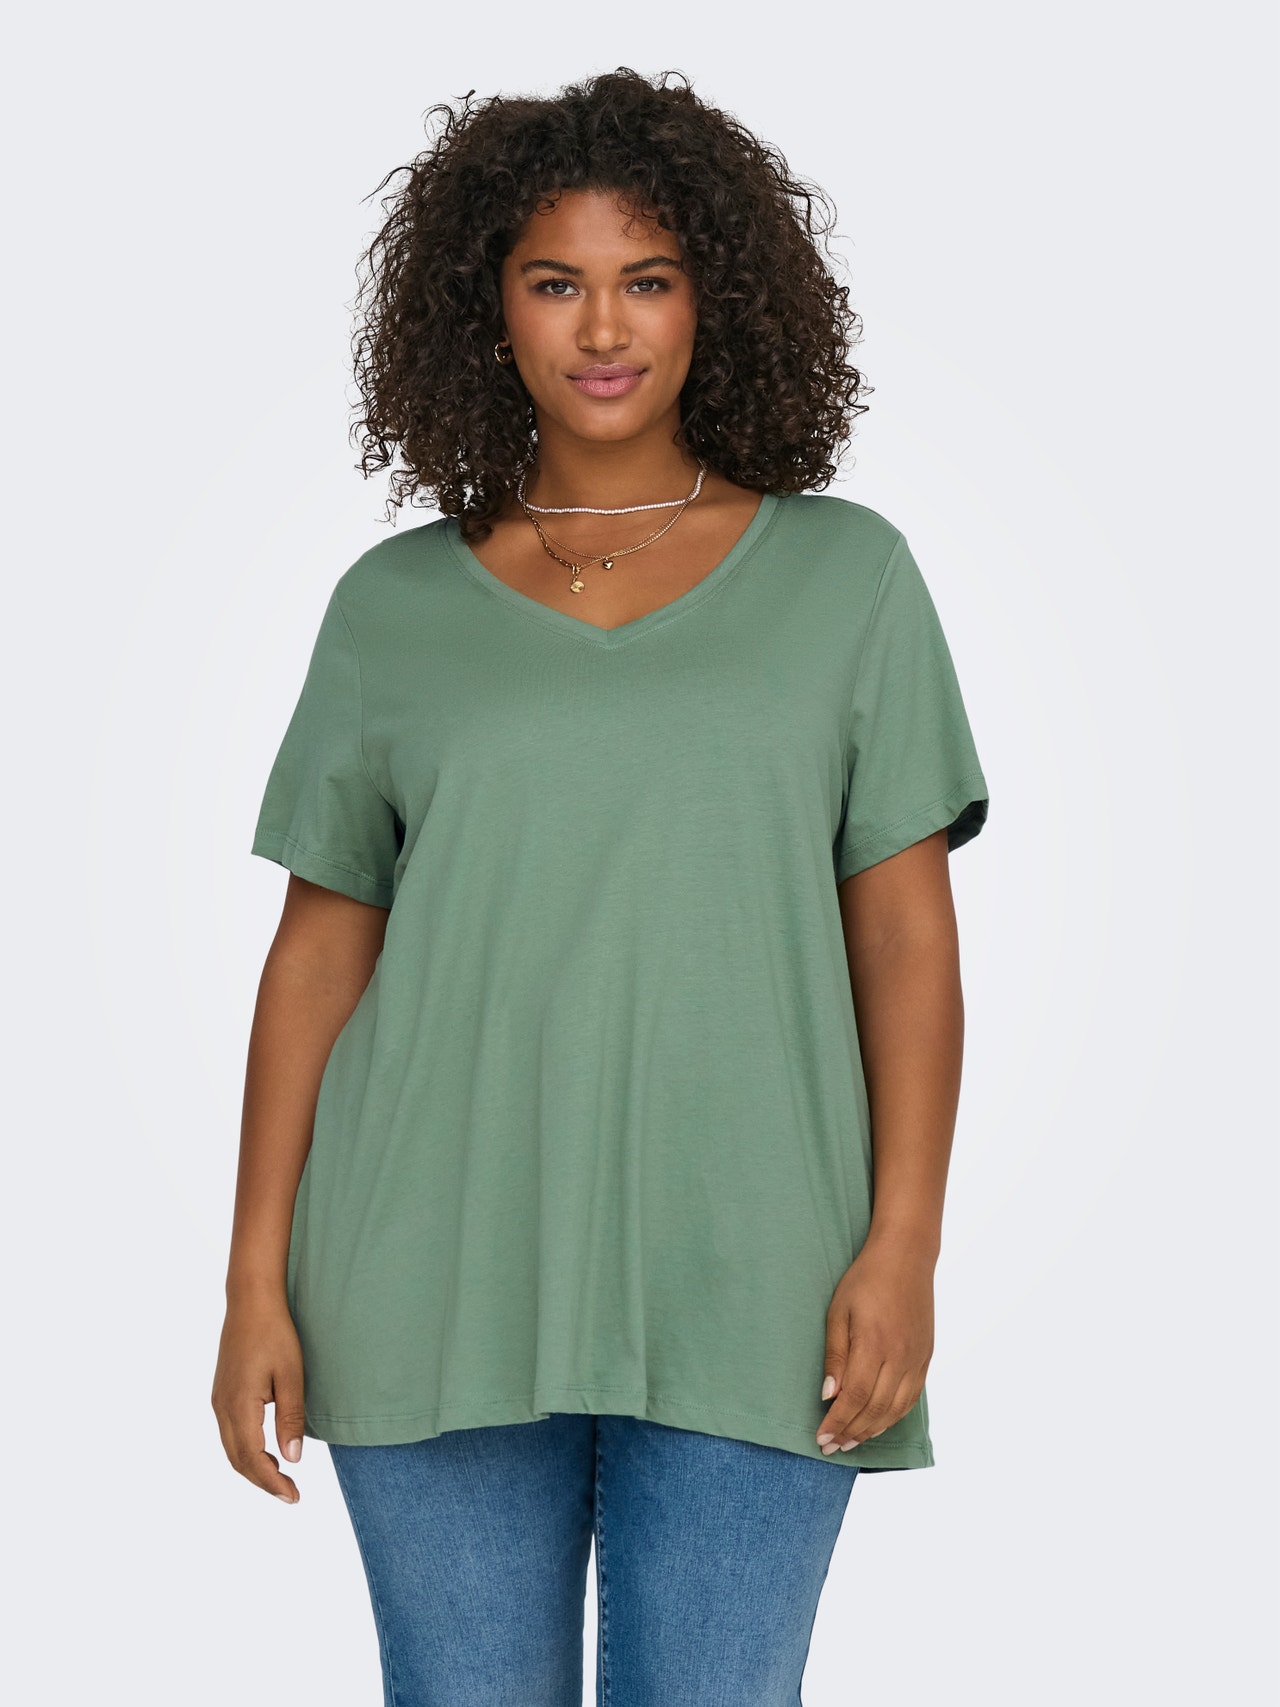 ONLY Curvy solid colored v-neck -Hedge Green - 15322776